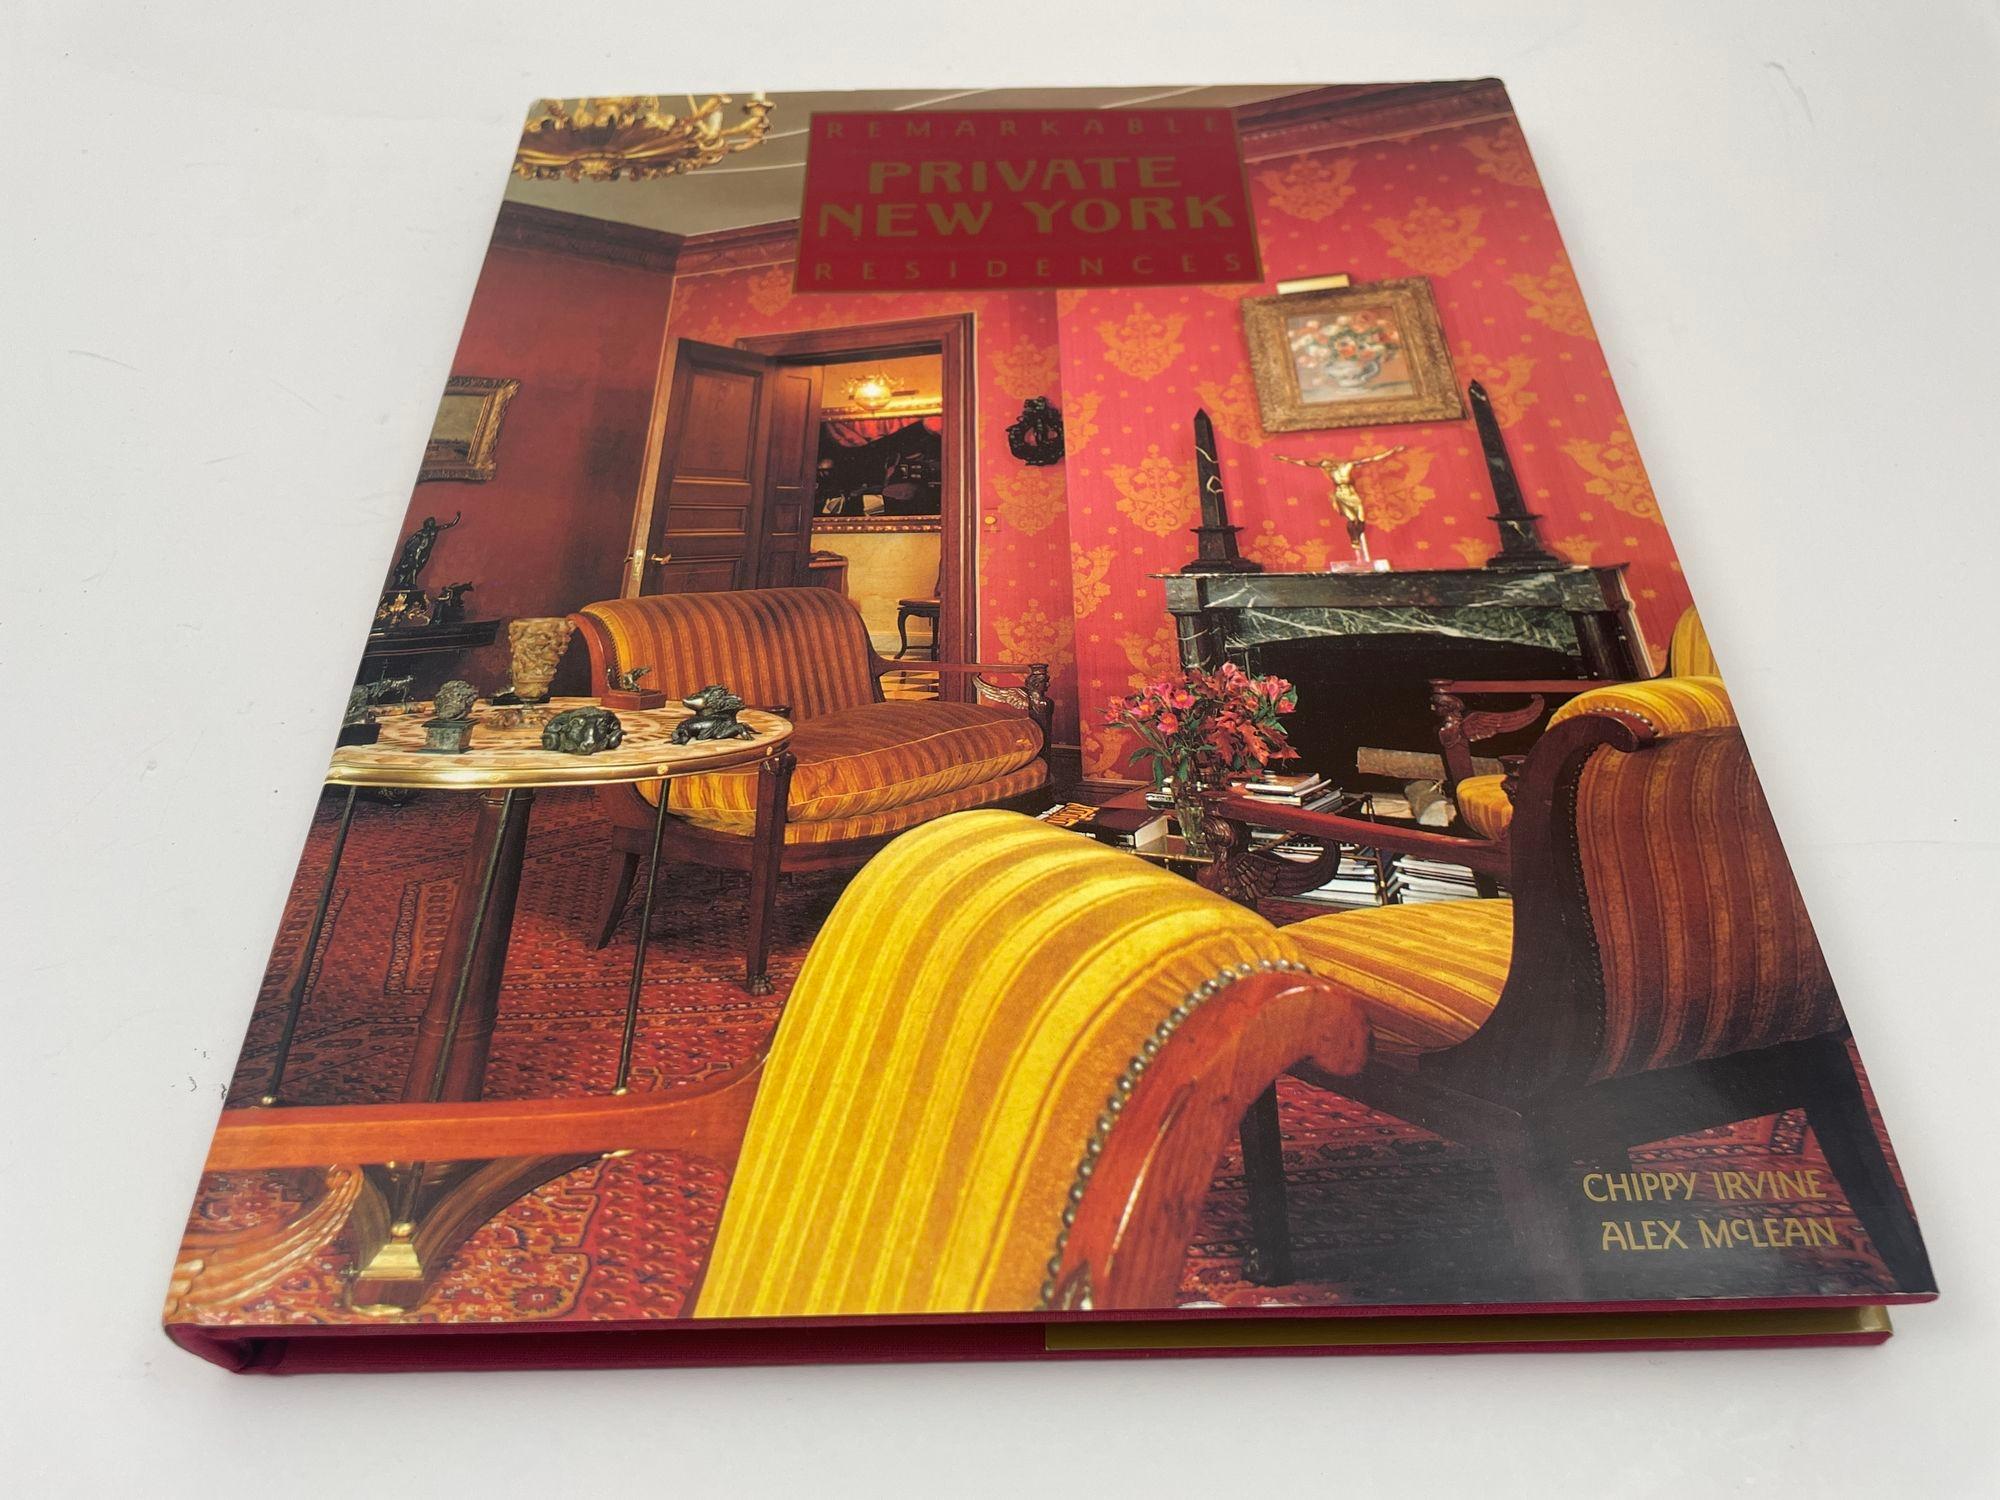 Expressionist New York Apartments: Private Views Hardcover Book by Charles Davey